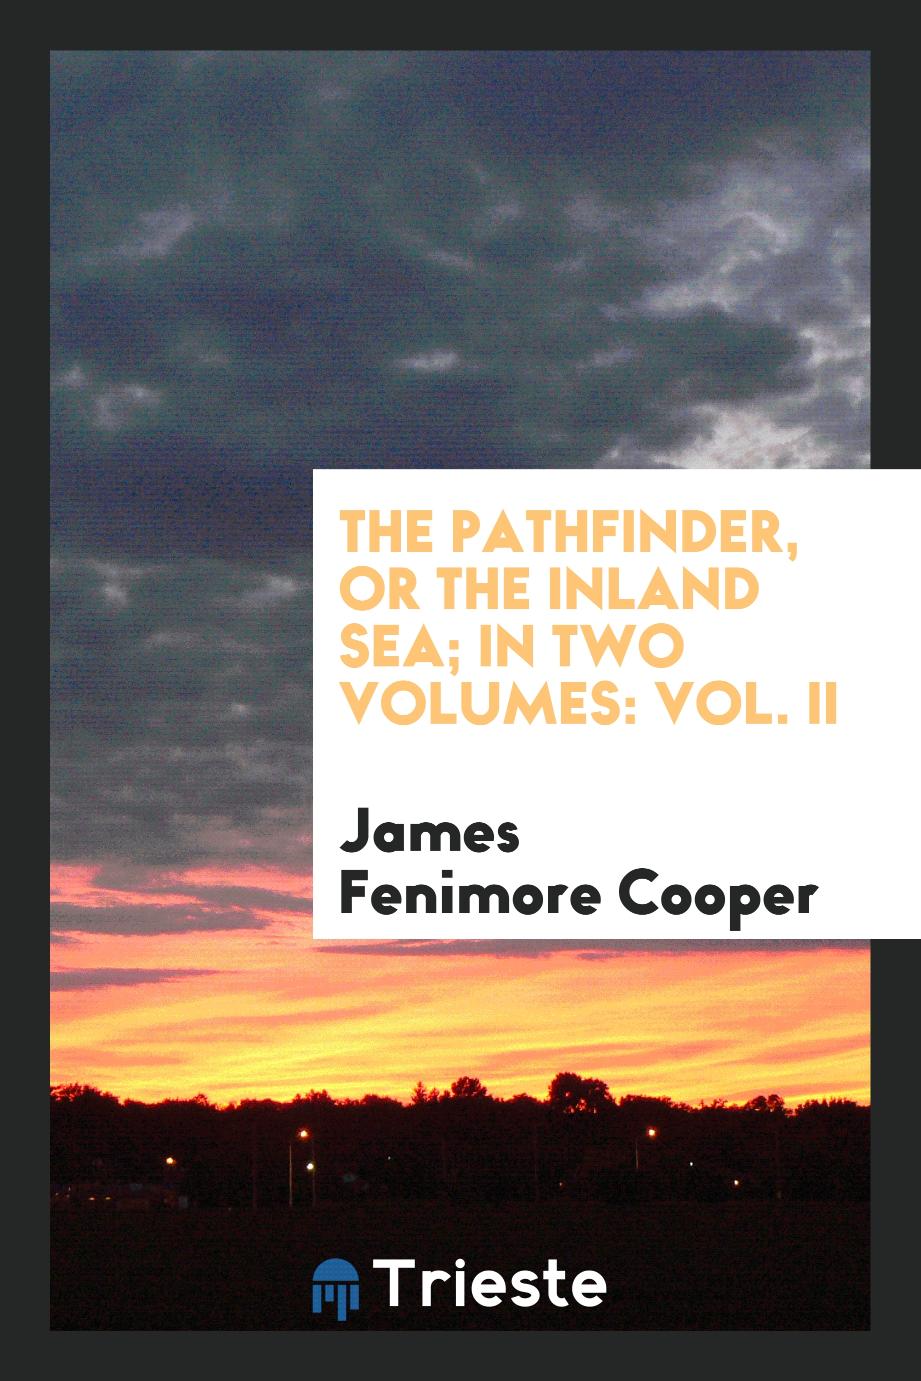 James Fenimore Cooper - The Pathfinder, or the Inland Sea; in two volumes: Vol. II